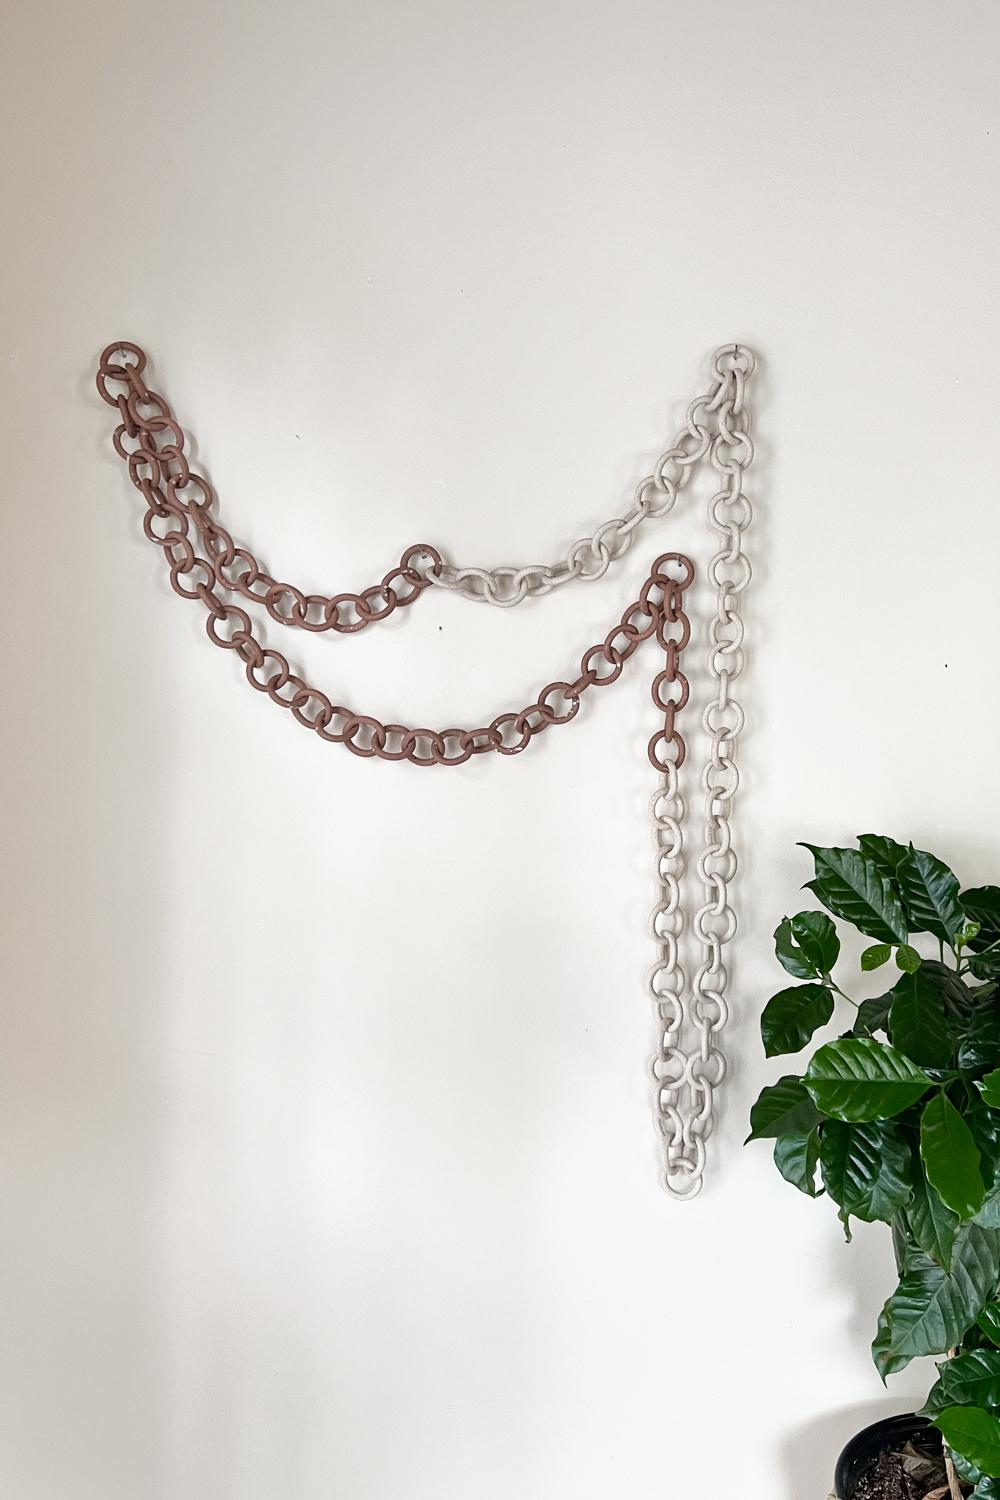 This eye-catching wall hanging adds a nomadic and mystical feel to any room. Created through a hand-intensive process of linking hand built stoneware rings of different sizes, this wall hanging is a dynamic decoration for an eclectic bedroom or